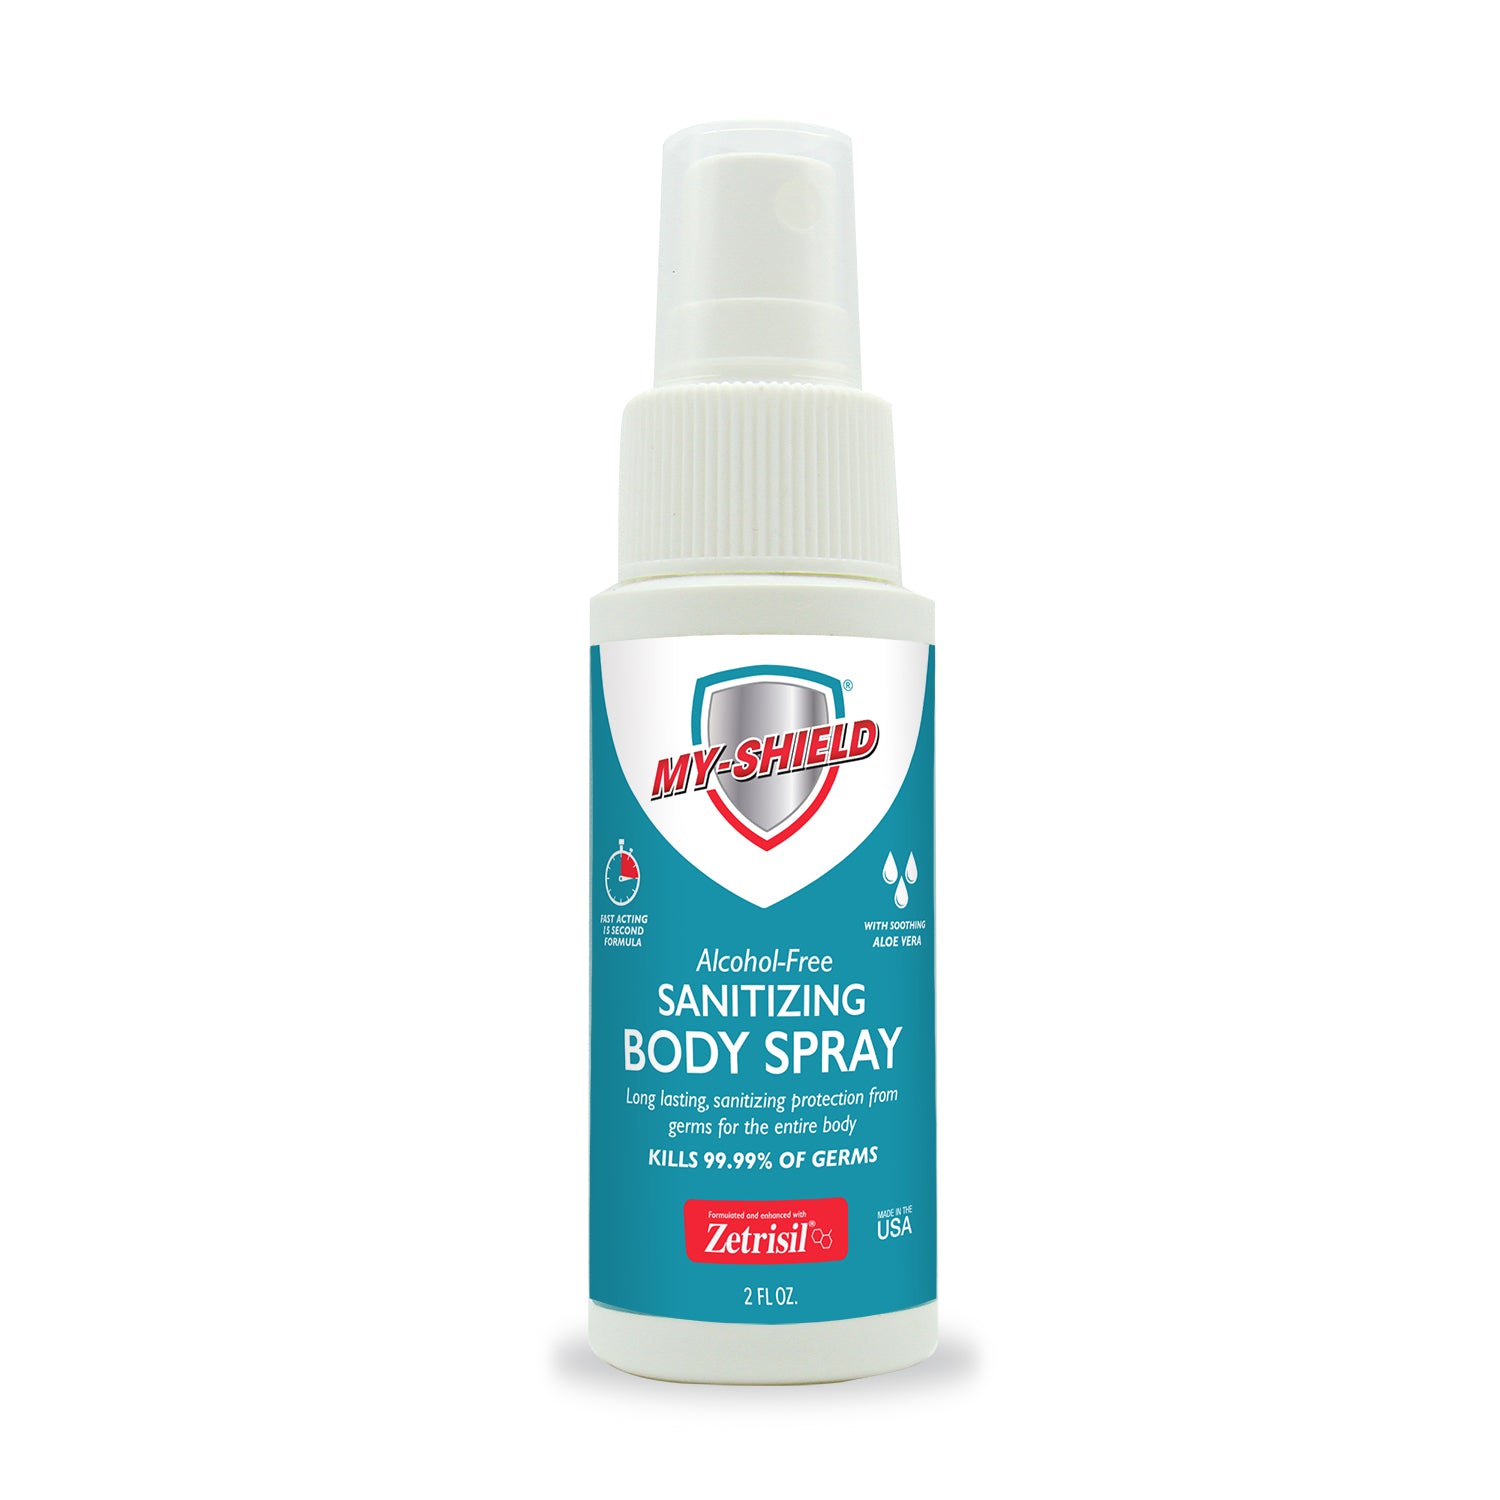 My-Shield Sanitizing Body Spray: Convenience and Effectiveness When You Need It Most